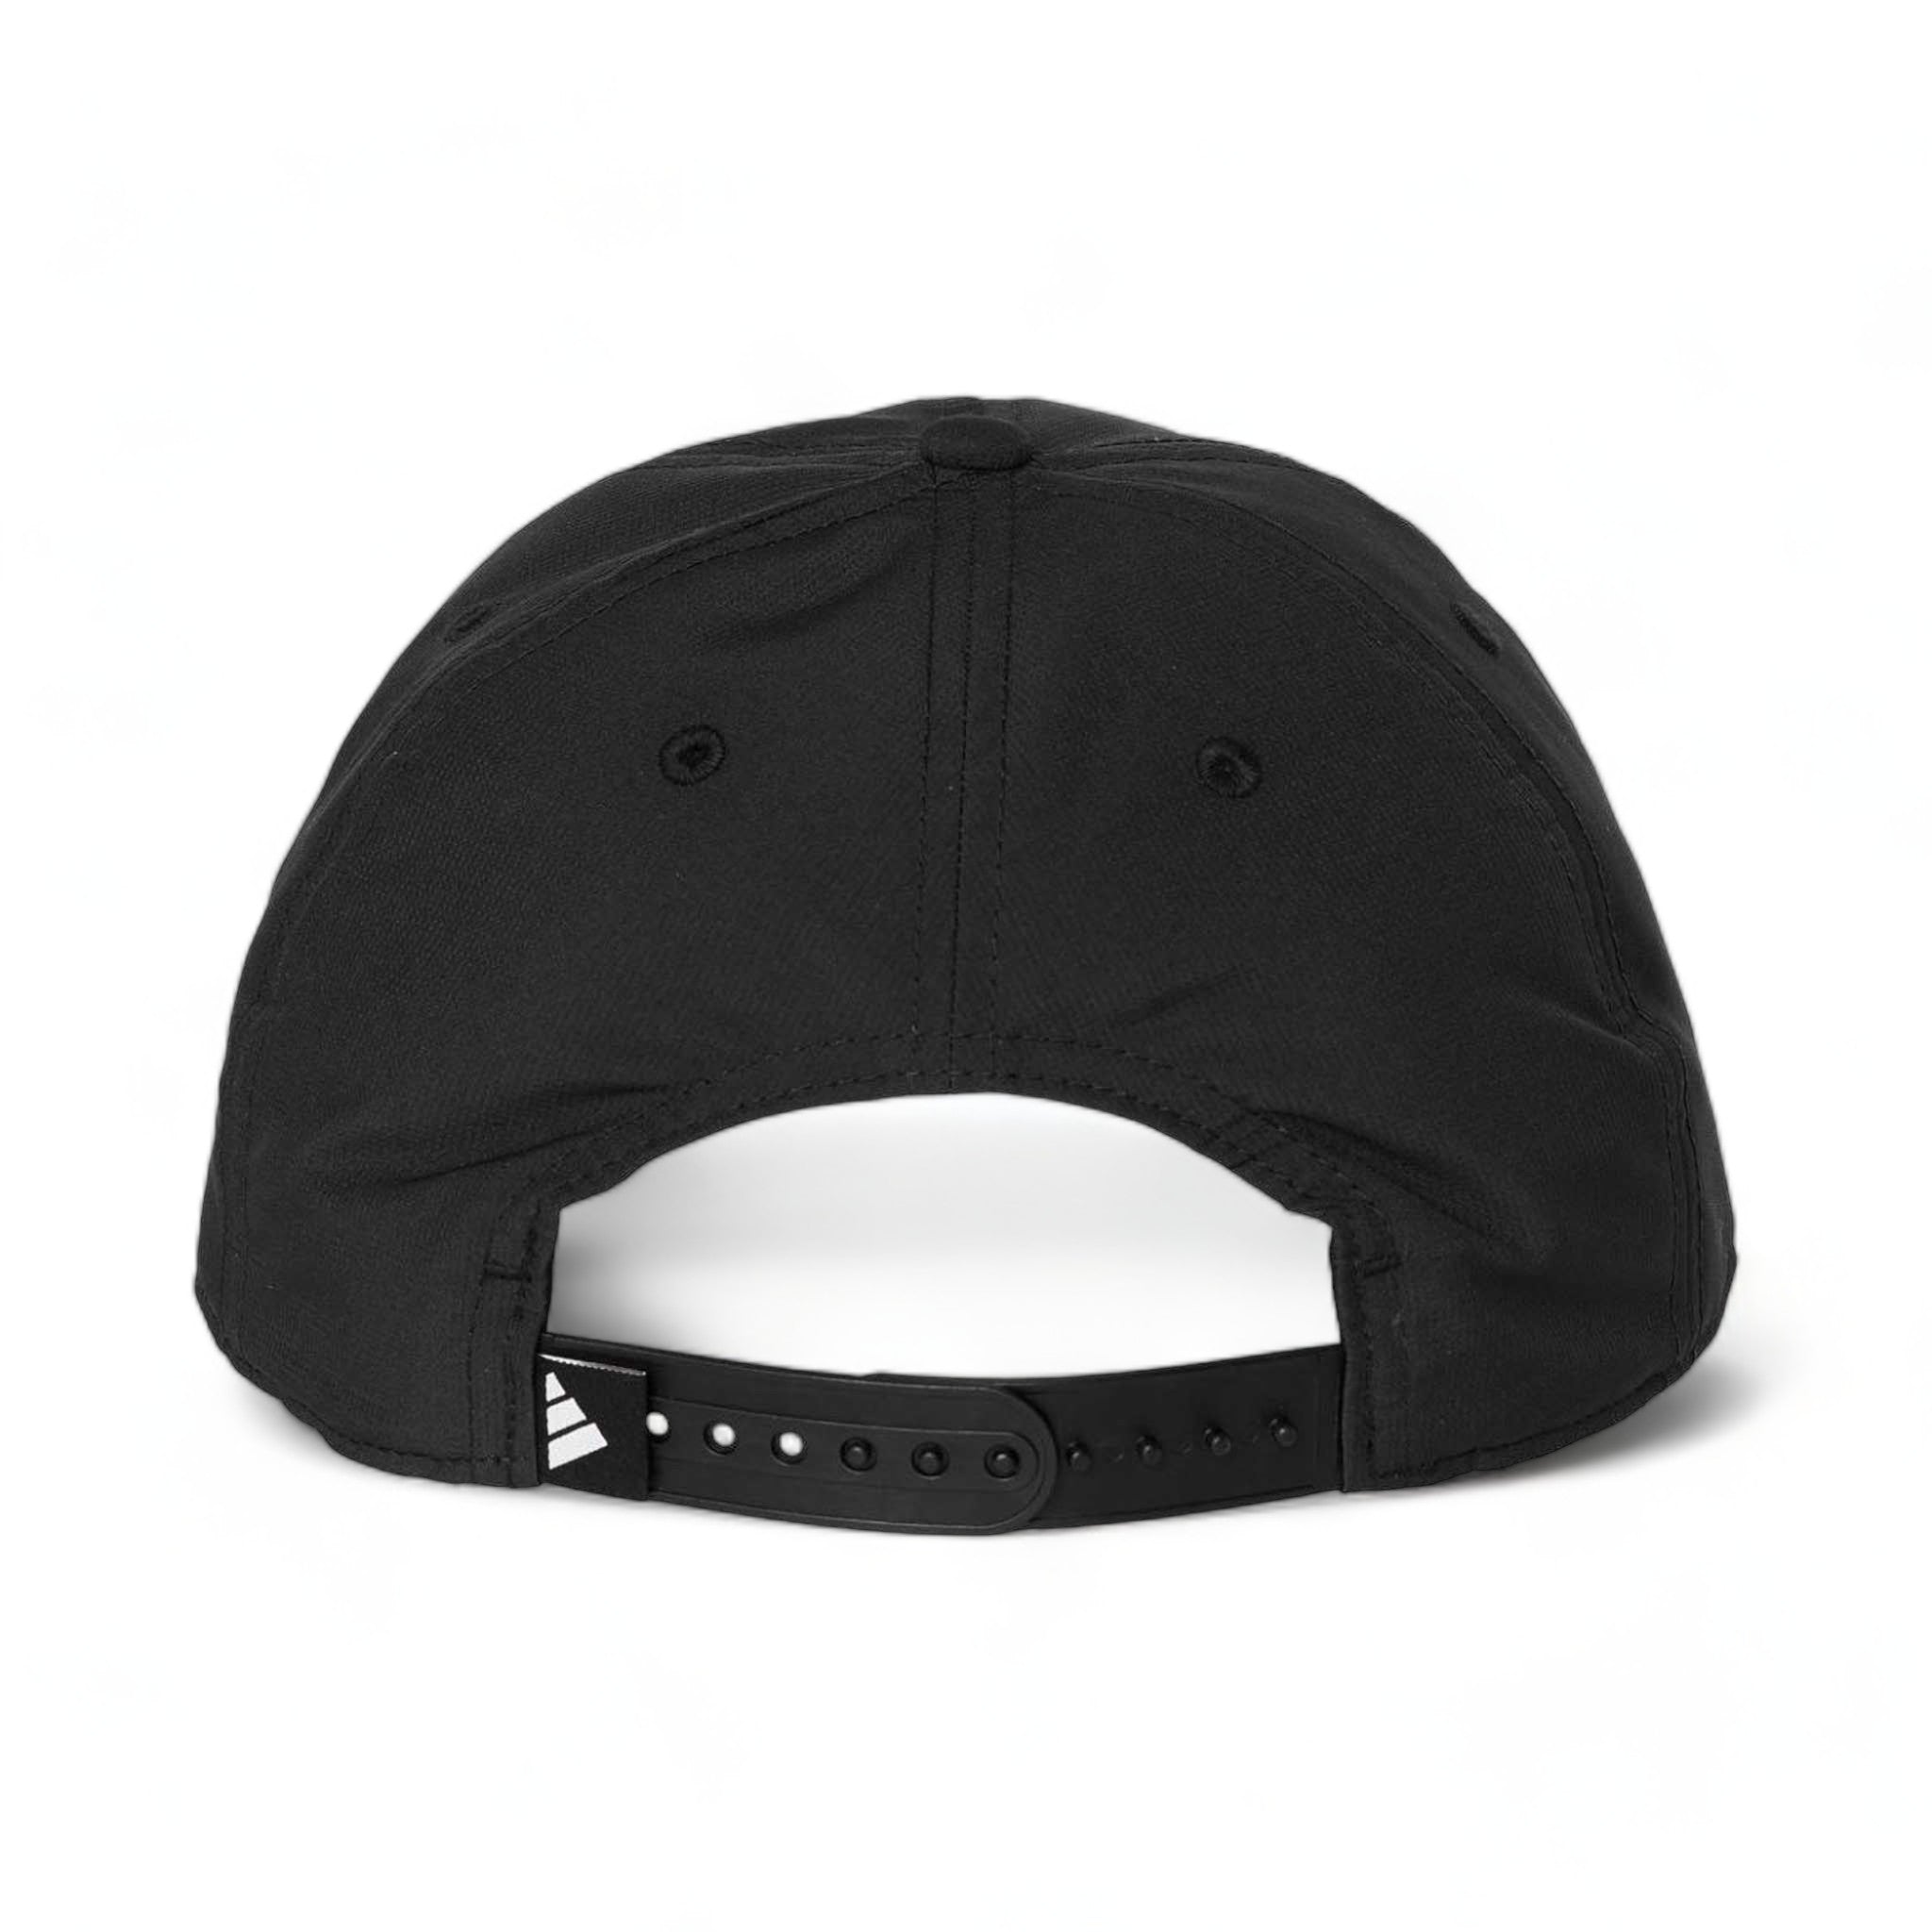 Back view of Adidas A600S custom hat in black